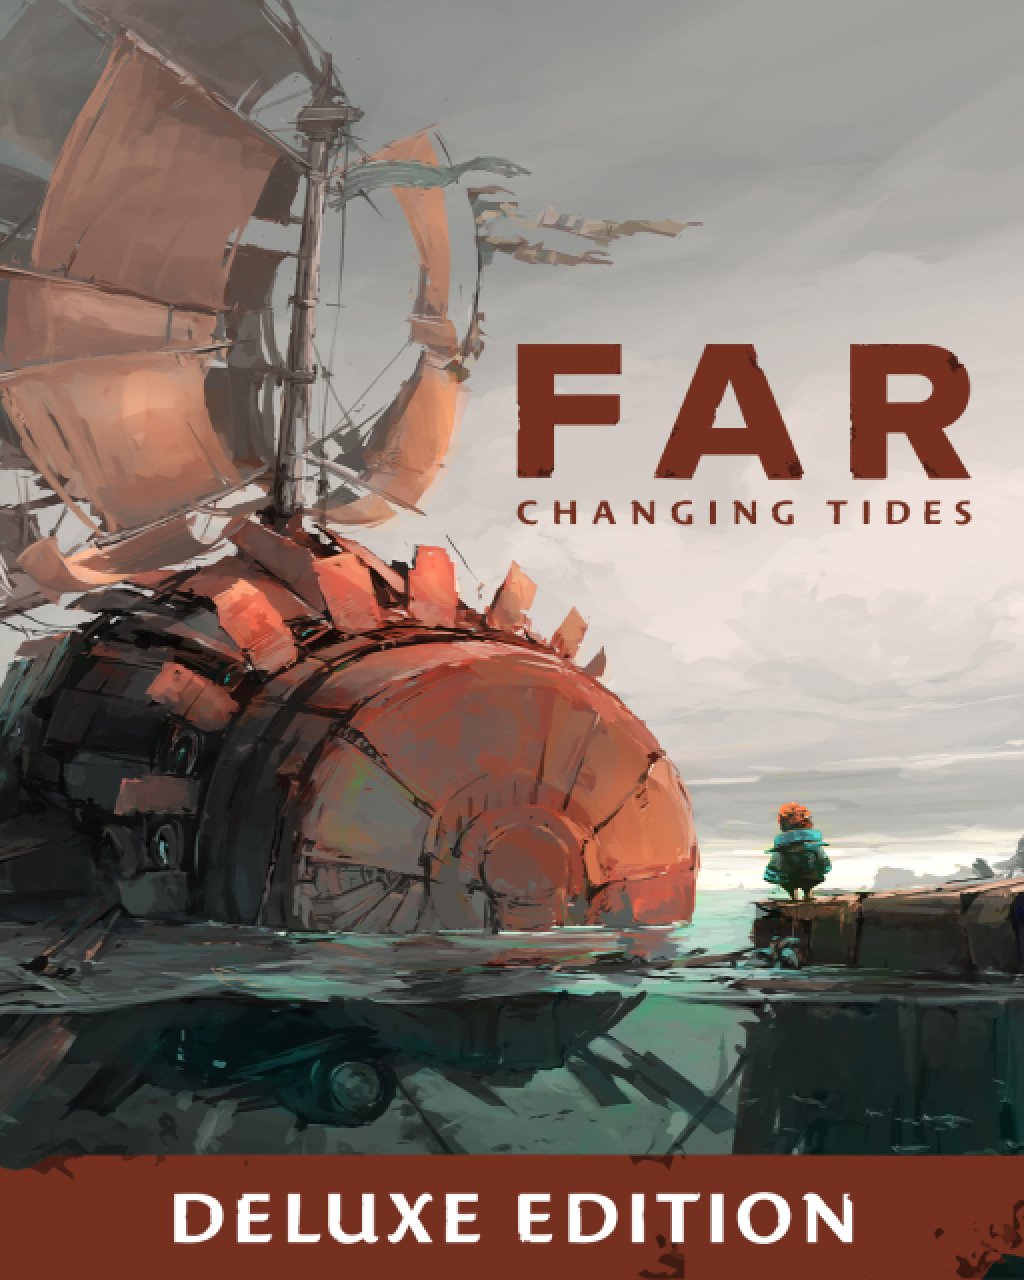 FAR Changing Tides Deluxe Edition